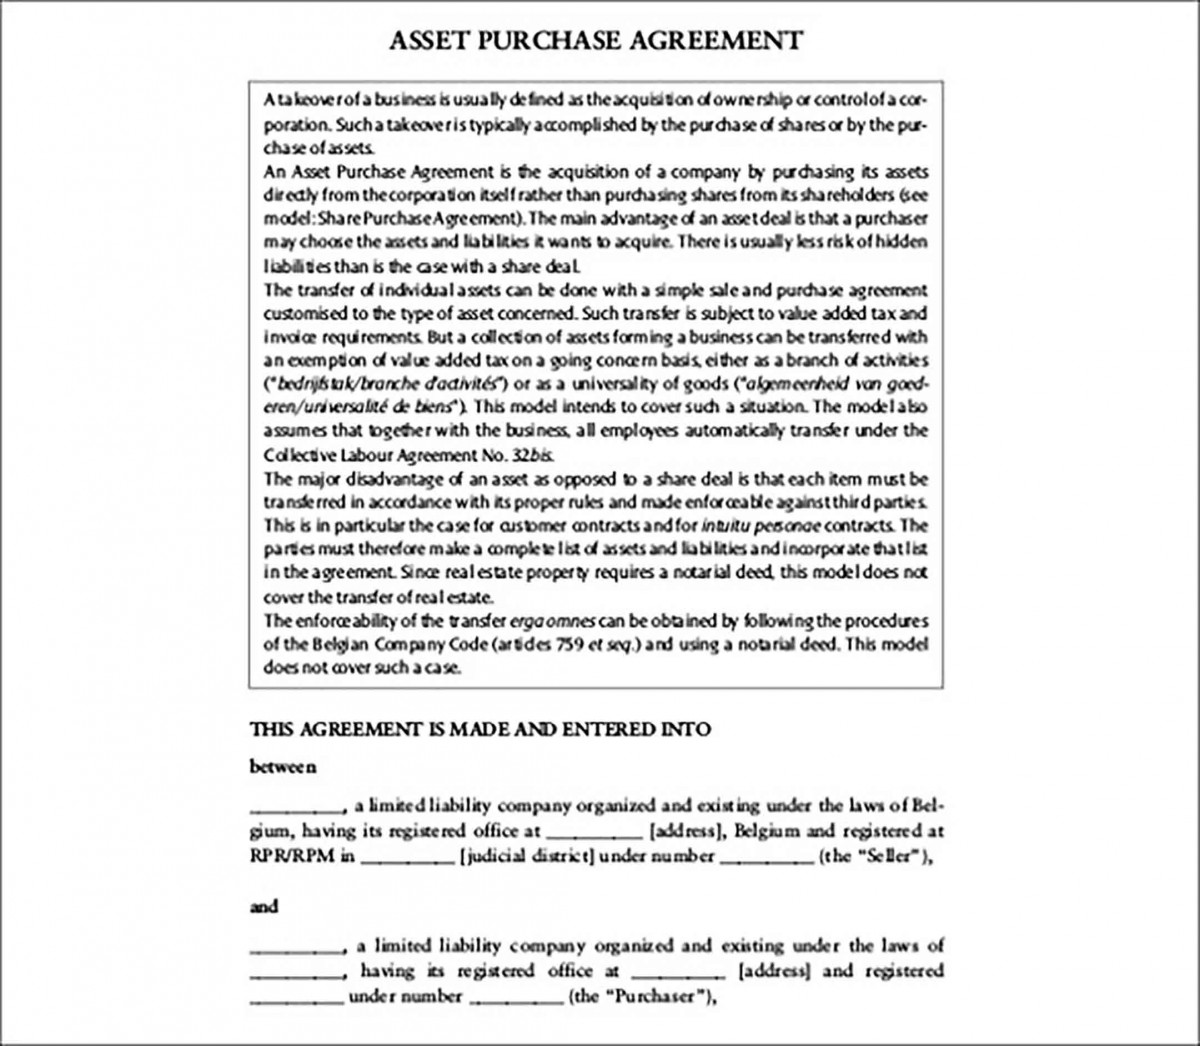 asset purchase agreement